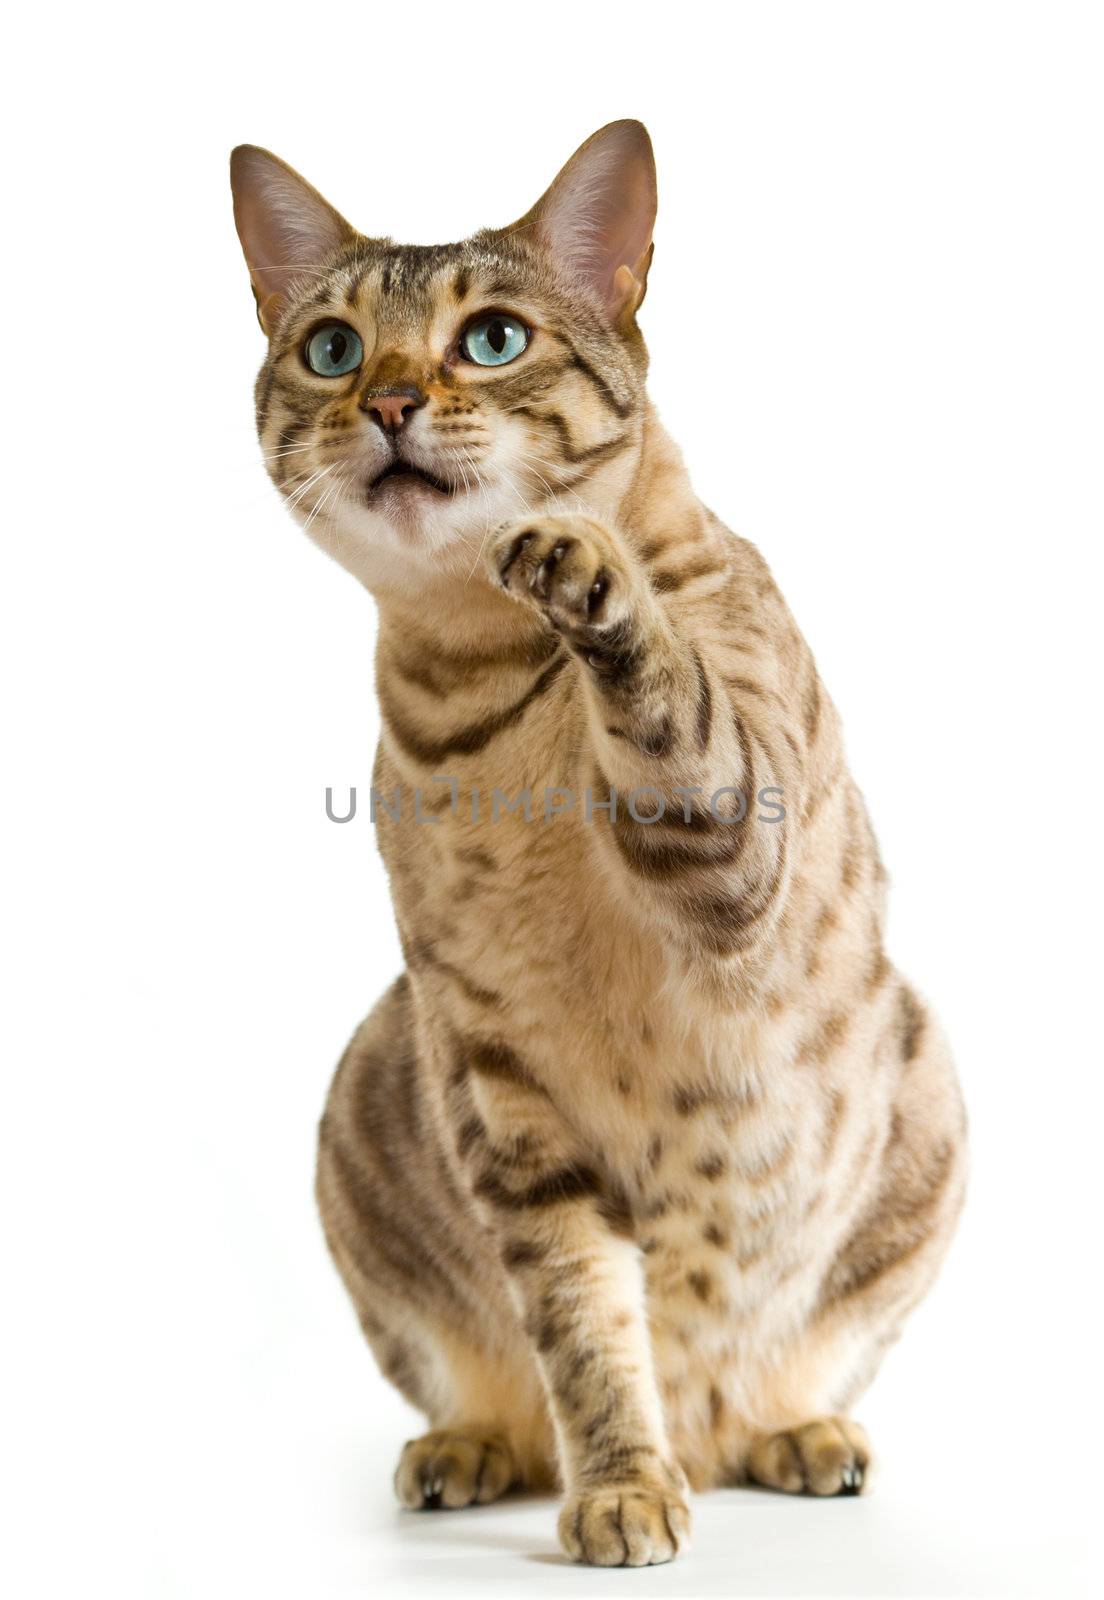 Young bengal cat or kitten clawing at the air while looking upwards towards some food